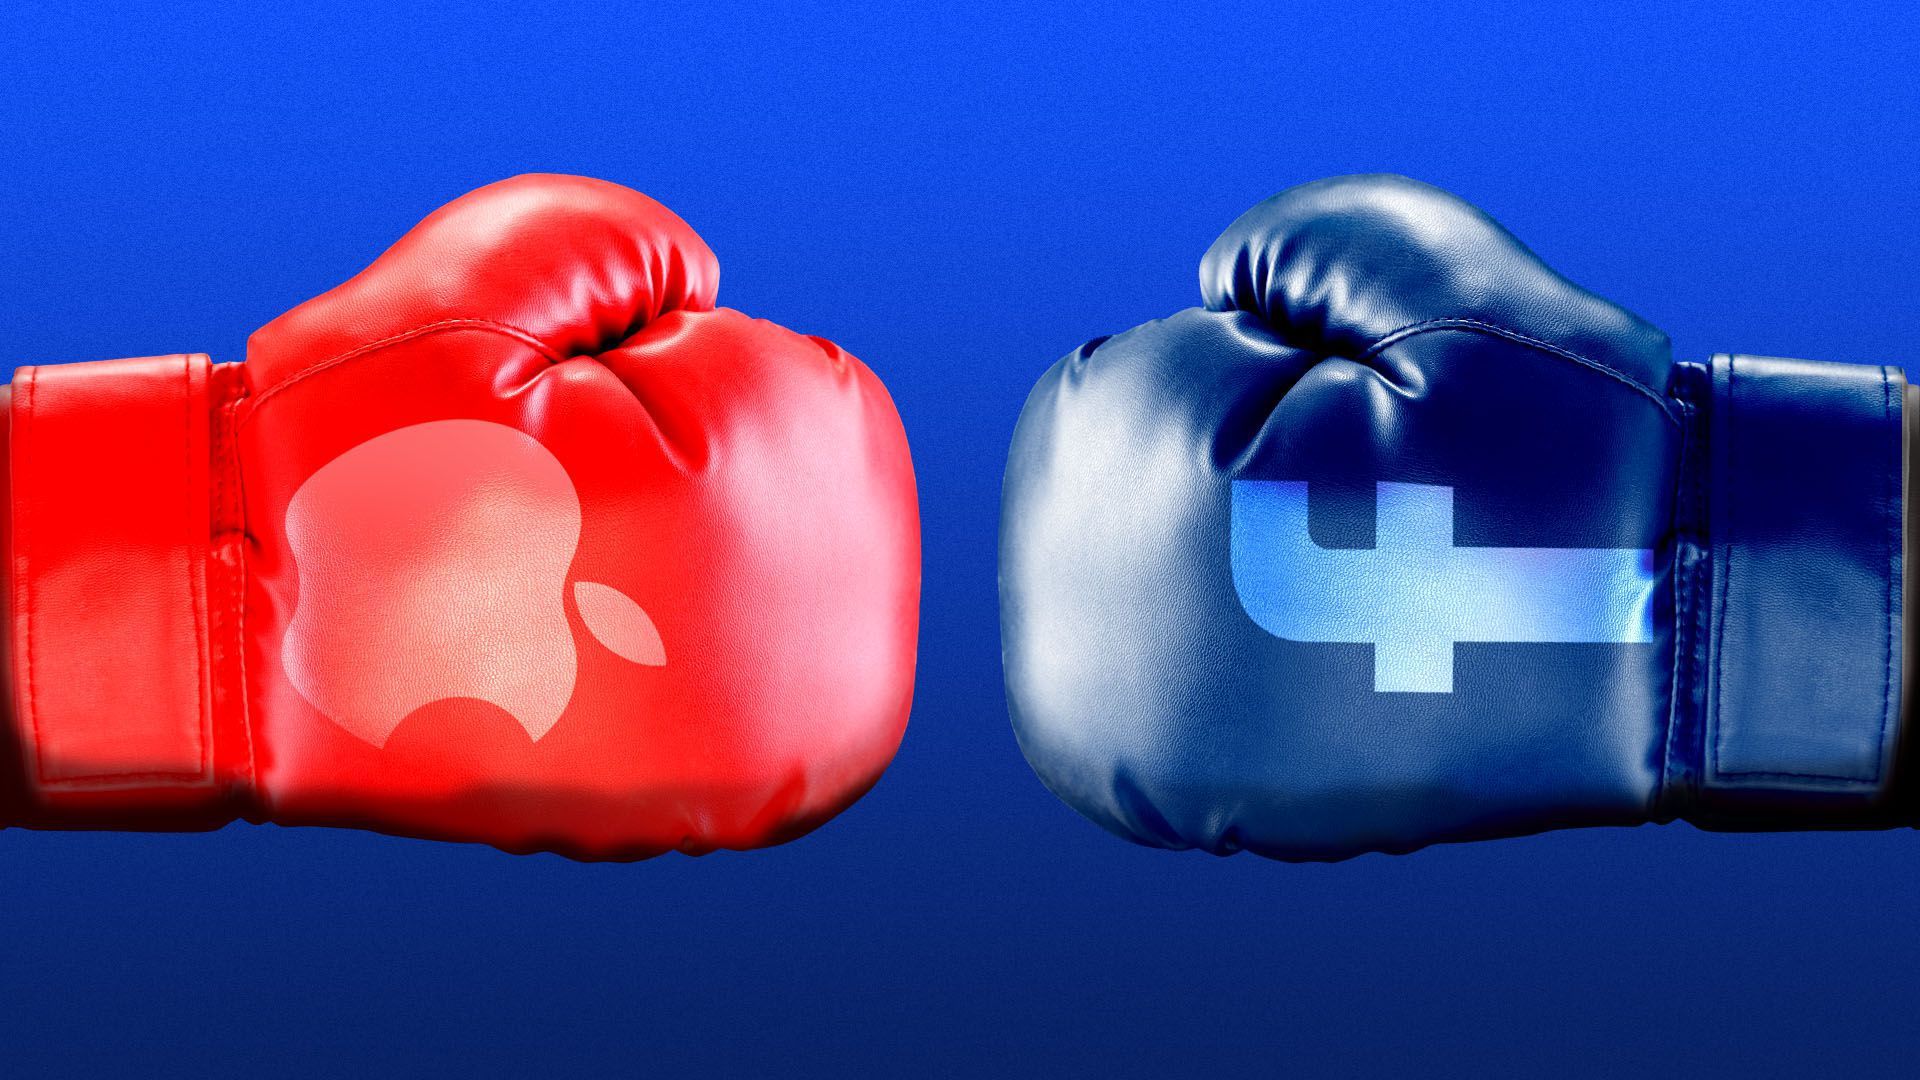 1 big thing: Apple-Facebook fight moves to metaverse